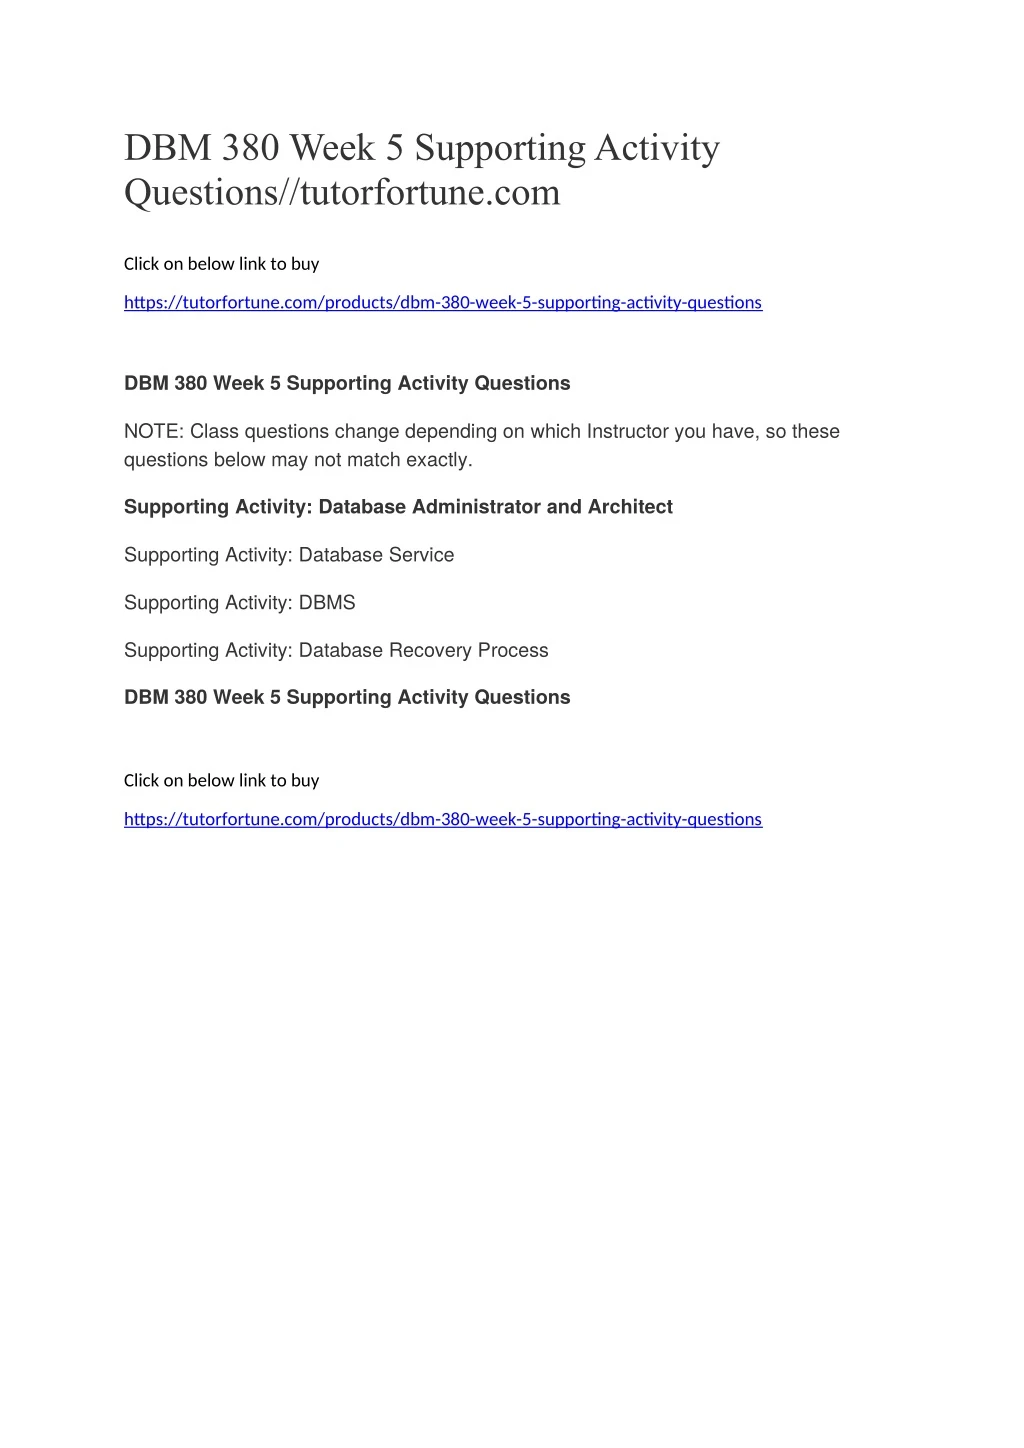 dbm 380 week 5 supporting activity questions